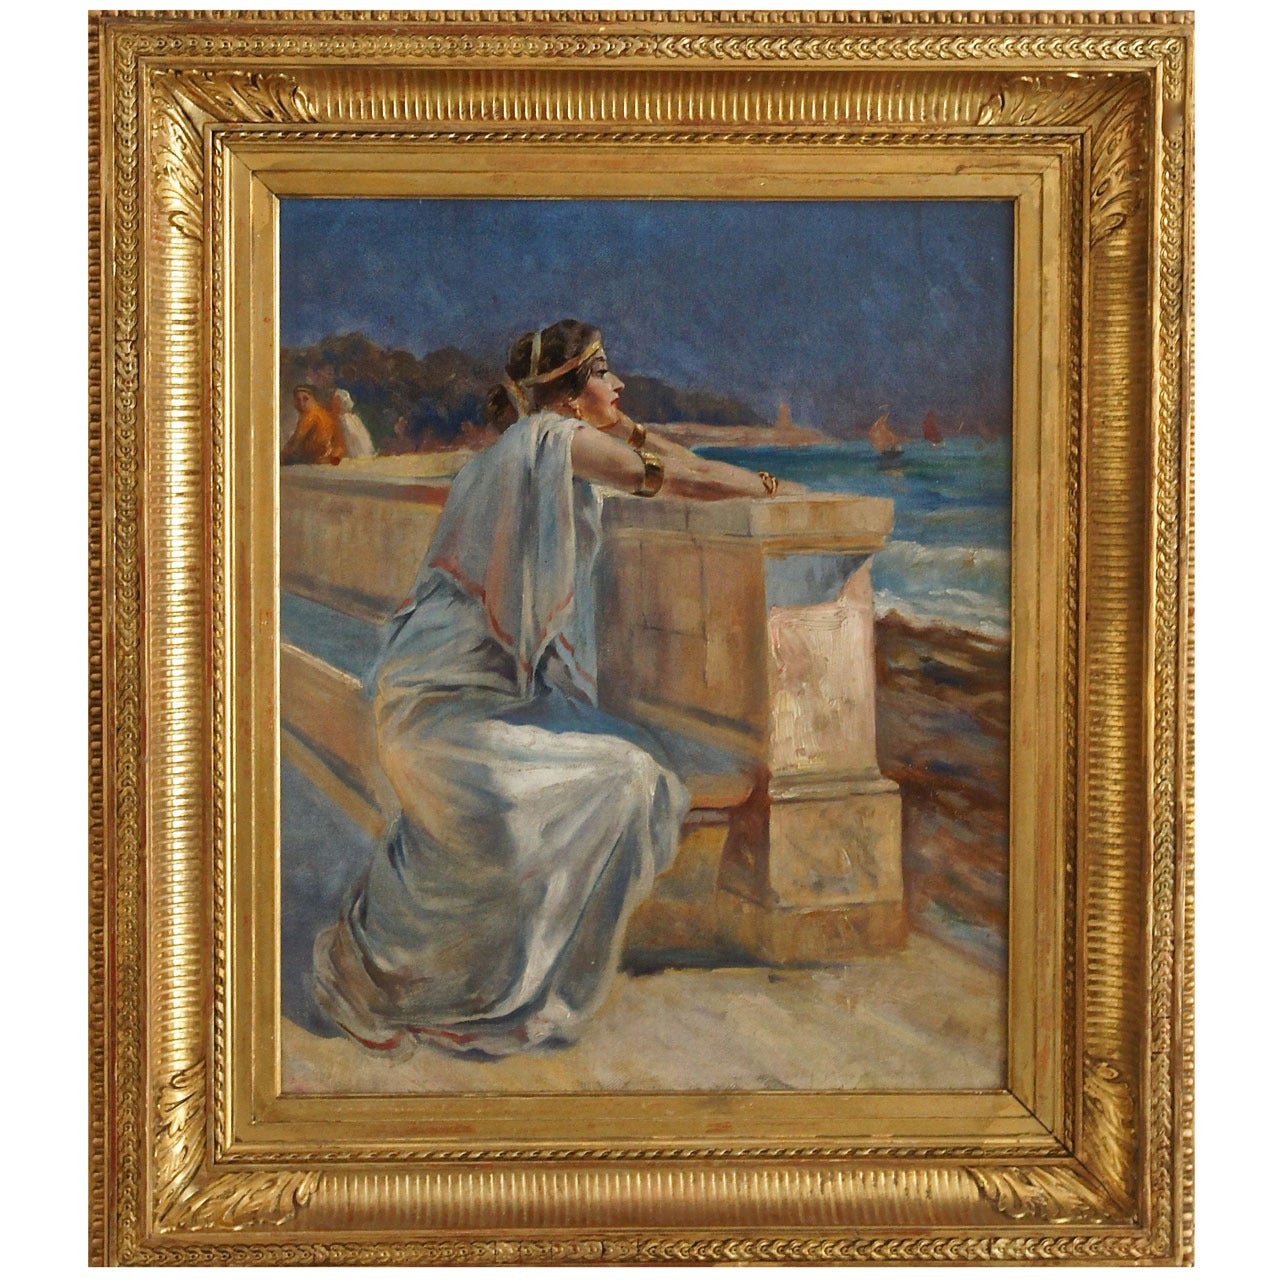 Orientalist scene, woman at the seashore, oil painting with original frame.